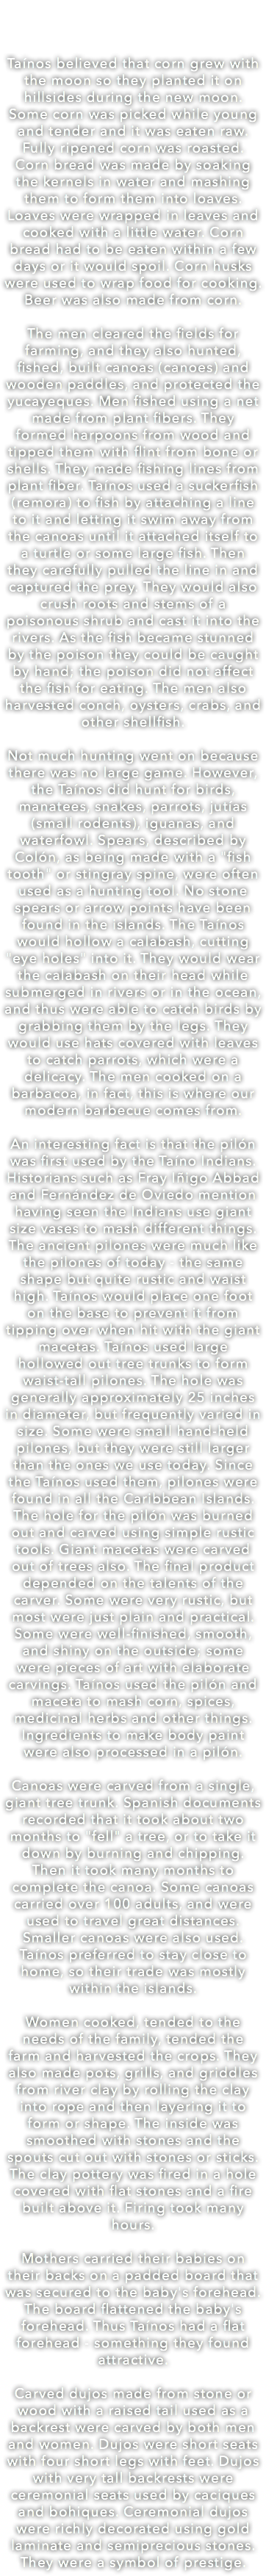  Taínos believed that corn grew with the moon so they planted it on hillsides during the new moon. Some corn was picked while young and tender and it was eaten raw. Fully ripened corn was roasted. Corn bread was made by soaking the kernels in water and mashing them to form them into loaves. Loaves were wrapped in leaves and cooked with a little water. Corn bread had to be eaten within a few days or it would spoil. Corn husks were used to wrap food for cooking. Beer was also made from corn. The men cleared the fields for farming, and they also hunted, fished, built canoas (canoes) and wooden paddles, and protected the yucayeques. Men fished using a net made from plant fibers. They formed harpoons from wood and tipped them with flint from bone or shells. They made fishing lines from plant fiber. Taínos used a suckerfish (remora) to fish by attaching a line to it and letting it swim away from the canoas until it attached itself to a turtle or some large fish. Then they carefully pulled the line in and captured the prey. They would also crush roots and stems of a poisonous shrub and cast it into the rivers. As the fish became stunned by the poison they could be caught by hand; the poison did not affect the fish for eating. The men also harvested conch, oysters, crabs, and other shellfish. Not much hunting went on because there was no large game. However, the Taínos did hunt for birds, manatees, snakes, parrots, jutías (small rodents), iguanas, and waterfowl. Spears, described by Colón, as being made with a "fish tooth" or stingray spine, were often used as a hunting tool. No stone spears or arrow points have been found in the islands. The Taínos would hollow a calabash, cutting "eye holes" into it. They would wear the calabash on their head while submerged in rivers or in the ocean, and thus were able to catch birds by grabbing them by the legs. They would use hats covered with leaves to catch parrots, which were a delicacy. The men cooked on a barbacoa, in fact, this is where our modern barbecue comes from. An interesting fact is that the pilón was first used by the Taíno Indians. Historians such as Fray Iñigo Abbad and Fernández de Oviedo mention having seen the Indians use giant size vases to mash different things. The ancient pilones were much like the pilones of today - the same shape but quite rustic and waist high. Taínos would place one foot on the base to prevent it from tipping over when hit with the giant macetas. Taínos used large hollowed out tree trunks to form waist-tall pilones. The hole was generally approximately 25 inches in diameter, but frequently varied in size. Some were small hand-held pilones, but they were still larger than the ones we use today. Since the Taínos used them, pilones were found in all the Caribbean Islands. The hole for the pilón was burned out and carved using simple rustic tools. Giant macetas were carved out of trees also. The final product depended on the talents of the carver. Some were very rustic, but most were just plain and practical. Some were well-finished, smooth, and shiny on the outside; some were pieces of art with elaborate carvings. Taínos used the pilón and maceta to mash corn, spices, medicinal herbs and other things. Ingredients to make body paint were also processed in a pilón. Canoas were carved from a single, giant tree trunk. Spanish documents recorded that it took about two months to "fell" a tree, or to take it down by burning and chipping. Then it took many months to complete the canoa. Some canoas carried over 100 adults, and were used to travel great distances. Smaller canoas were also used. Taínos preferred to stay close to home, so their trade was mostly within the islands. Women cooked, tended to the needs of the family, tended the farm and harvested the crops. They also made pots, grills, and griddles from river clay by rolling the clay into rope and then layering it to form or shape. The inside was smoothed with stones and the spouts cut out with stones or sticks. The clay pottery was fired in a hole covered with flat stones and a fire built above it. Firing took many hours. Mothers carried their babies on their backs on a padded board that was secured to the baby's forehead. The board flattened the baby's forehead. Thus Taínos had a flat forehead - something they found attractive. Carved dujos made from stone or wood with a raised tail used as a backrest were carved by both men and women. Dujos were short seats with four short legs with feet. Dujos with very tall backrests were ceremonial seats used by caciques and bohiques. Ceremonial dujos were richly decorated using gold laminate and semiprecious stones. They were a symbol of prestige.